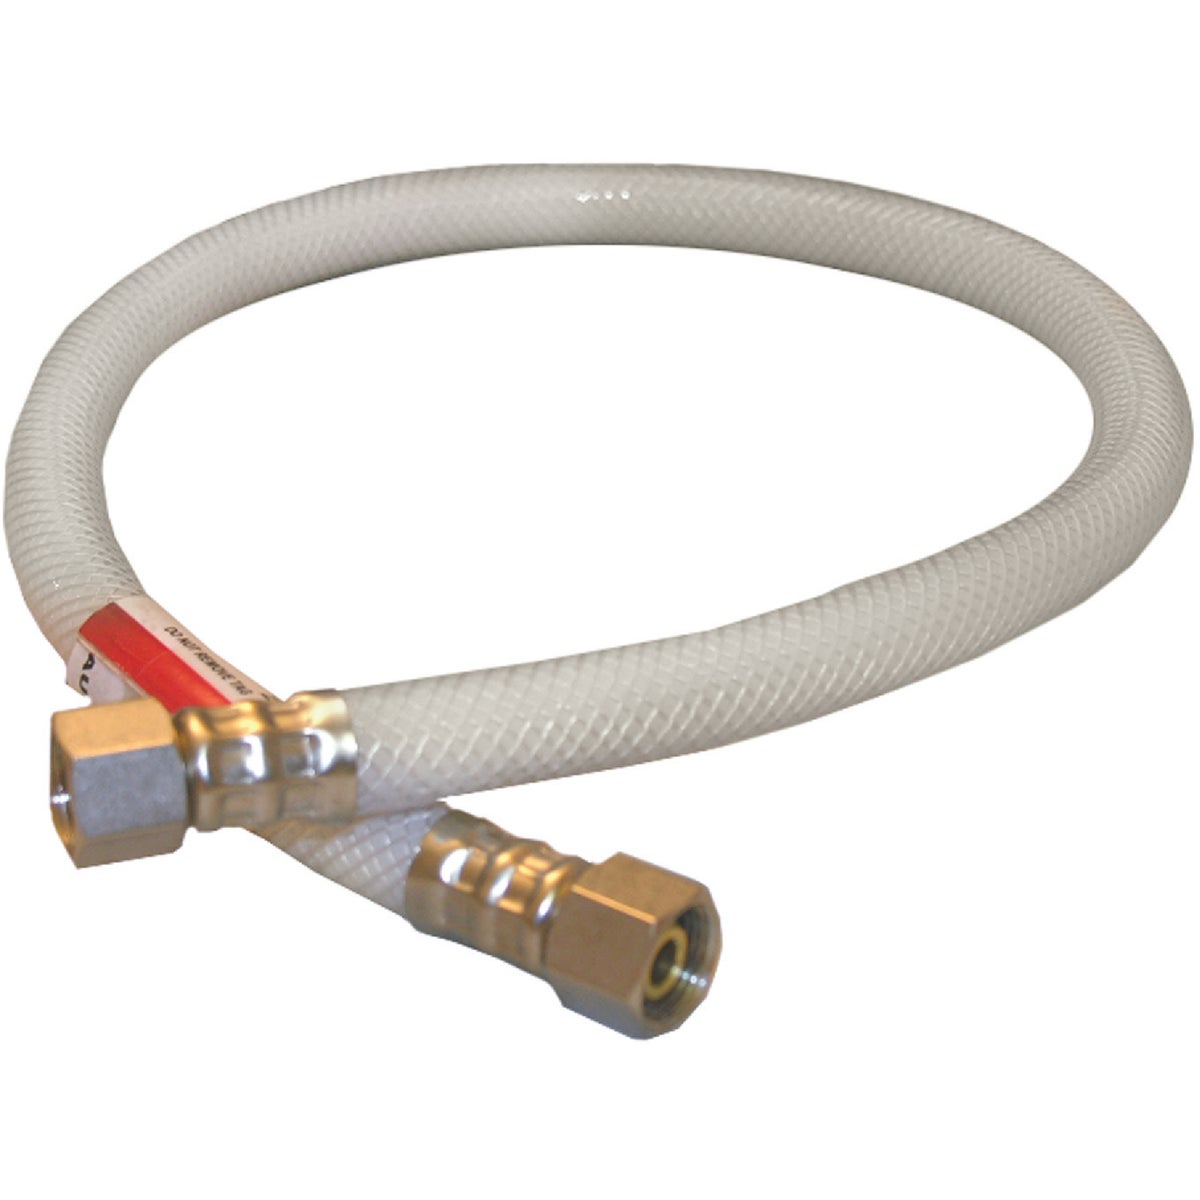 Lasco 3/8 In. C x 3/8 In. C x 24 In. L Braided Poly Vinyl Appliance Water Connector